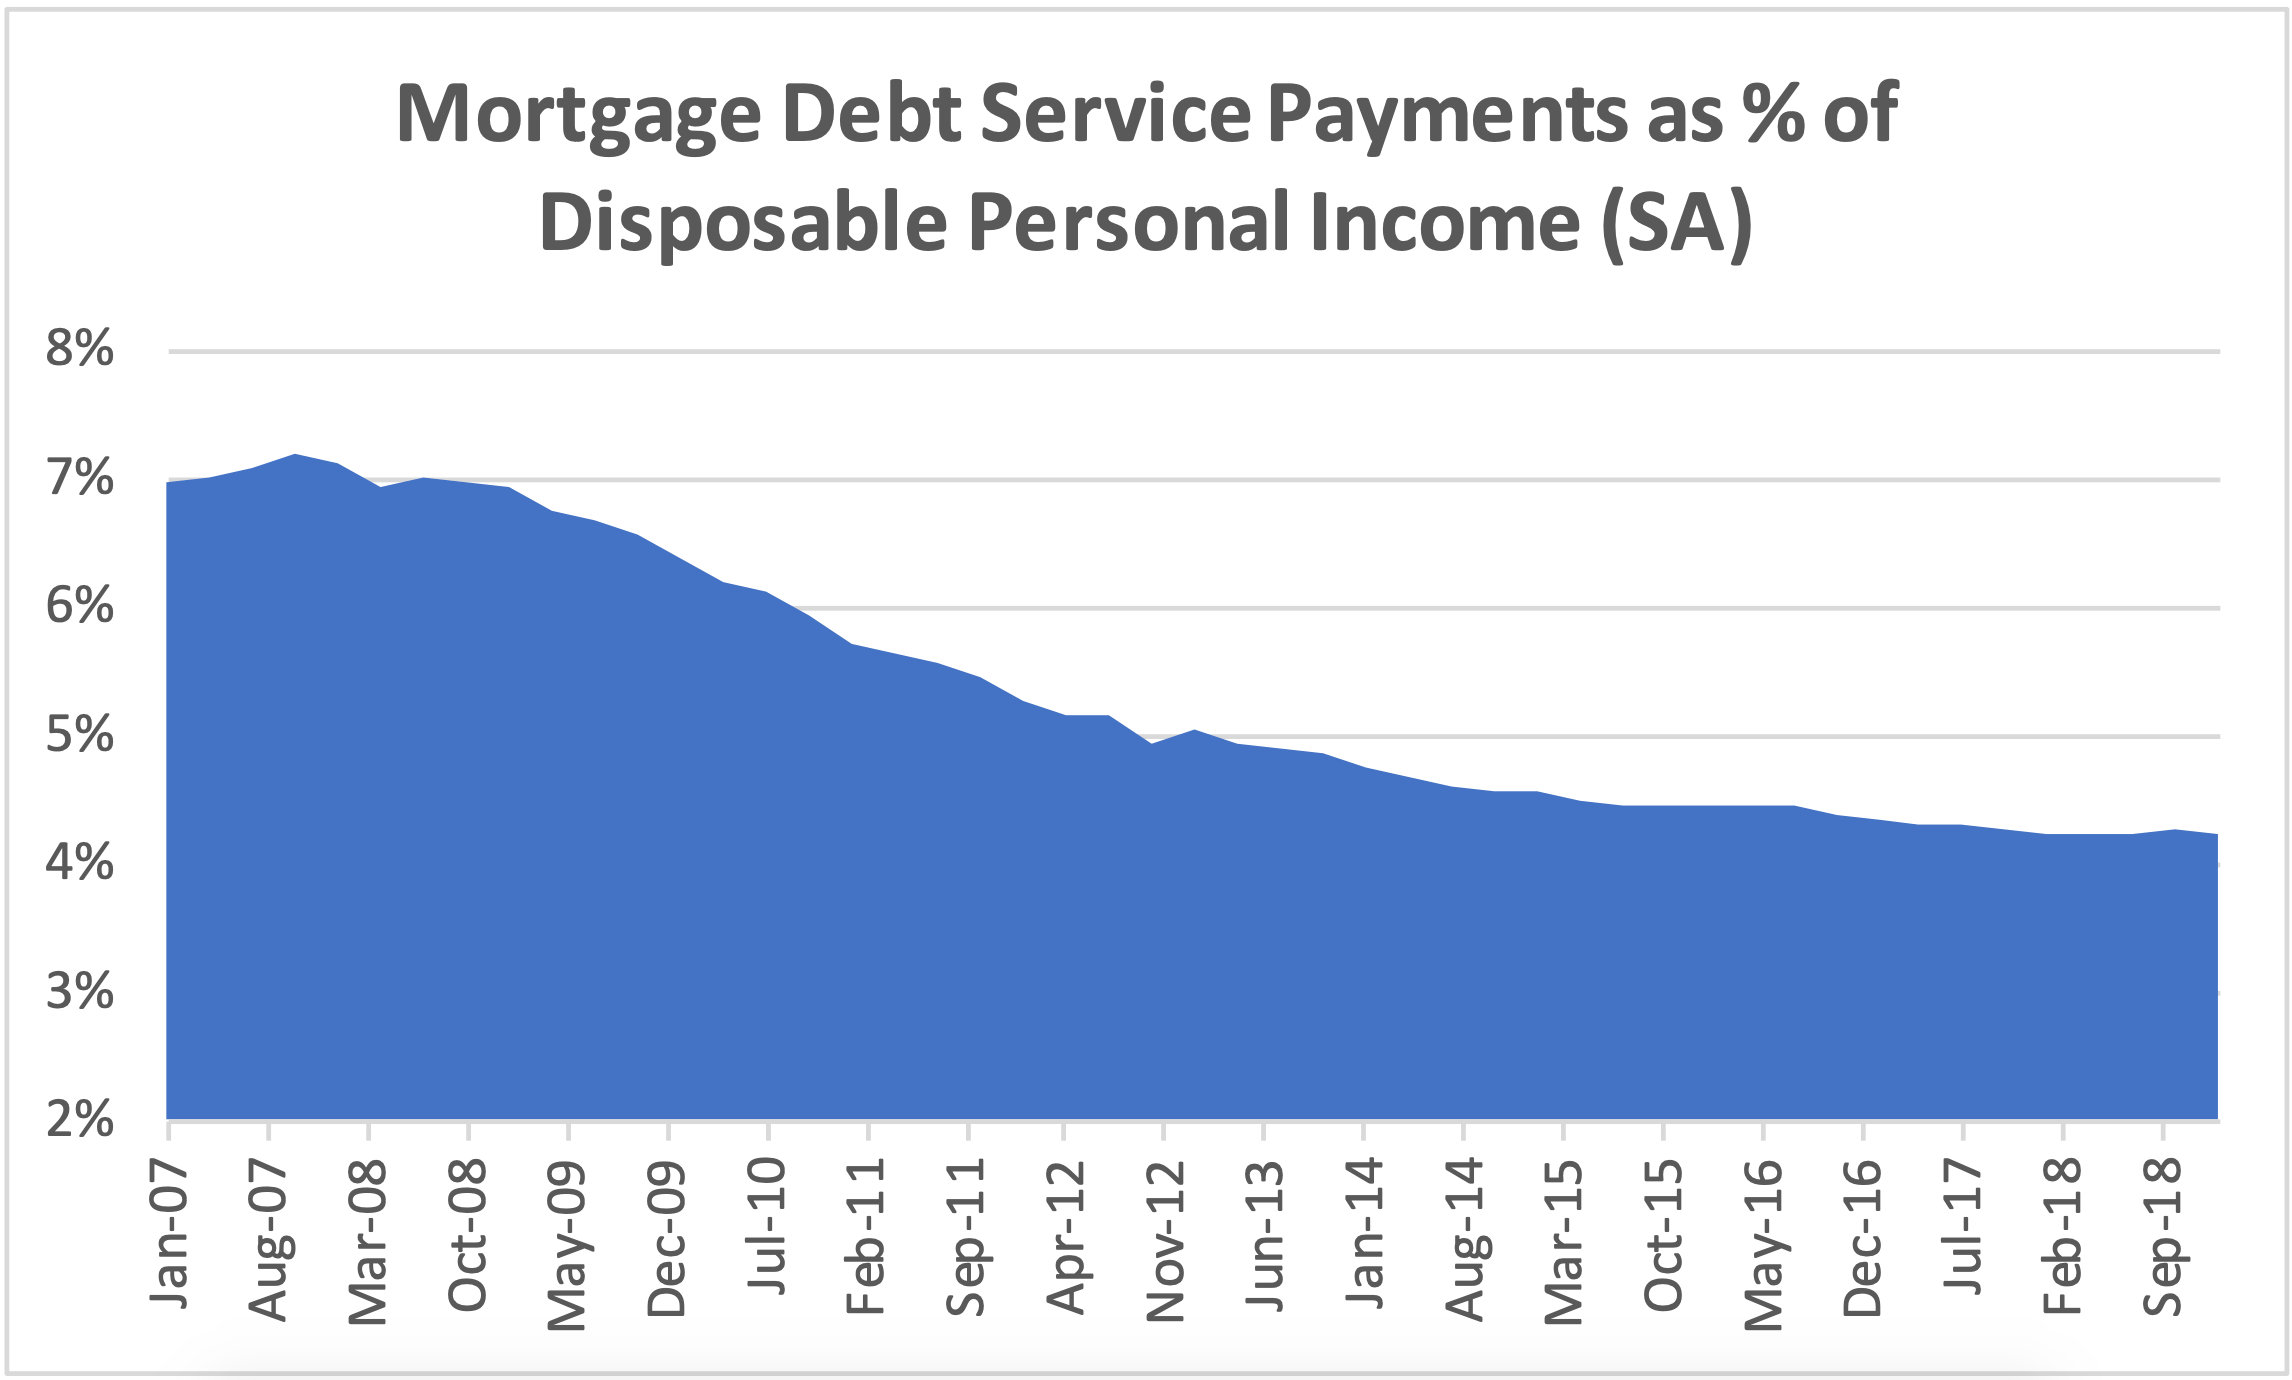 Mortgage Debt Service Payments as % of
Disposable Personal Income (SA)